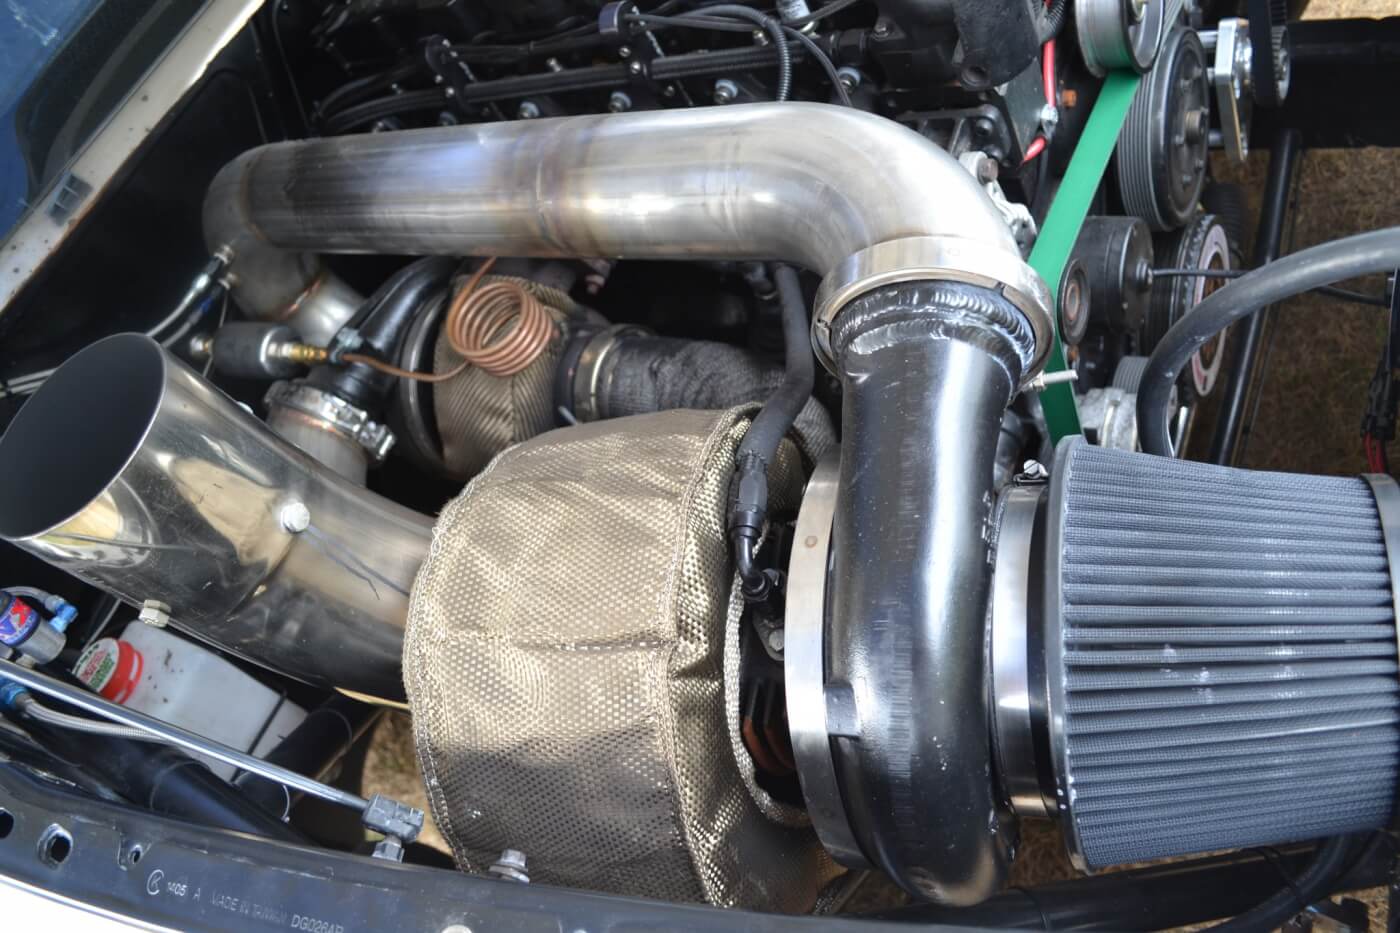 The turbo system on Ben's drag truck is quite impressive, and it has to be, to flow enough air for nearly 1,600 horsepower. The most visible air mover is a Garrett GT5541R turbo, which is a whopping 106mm in size.